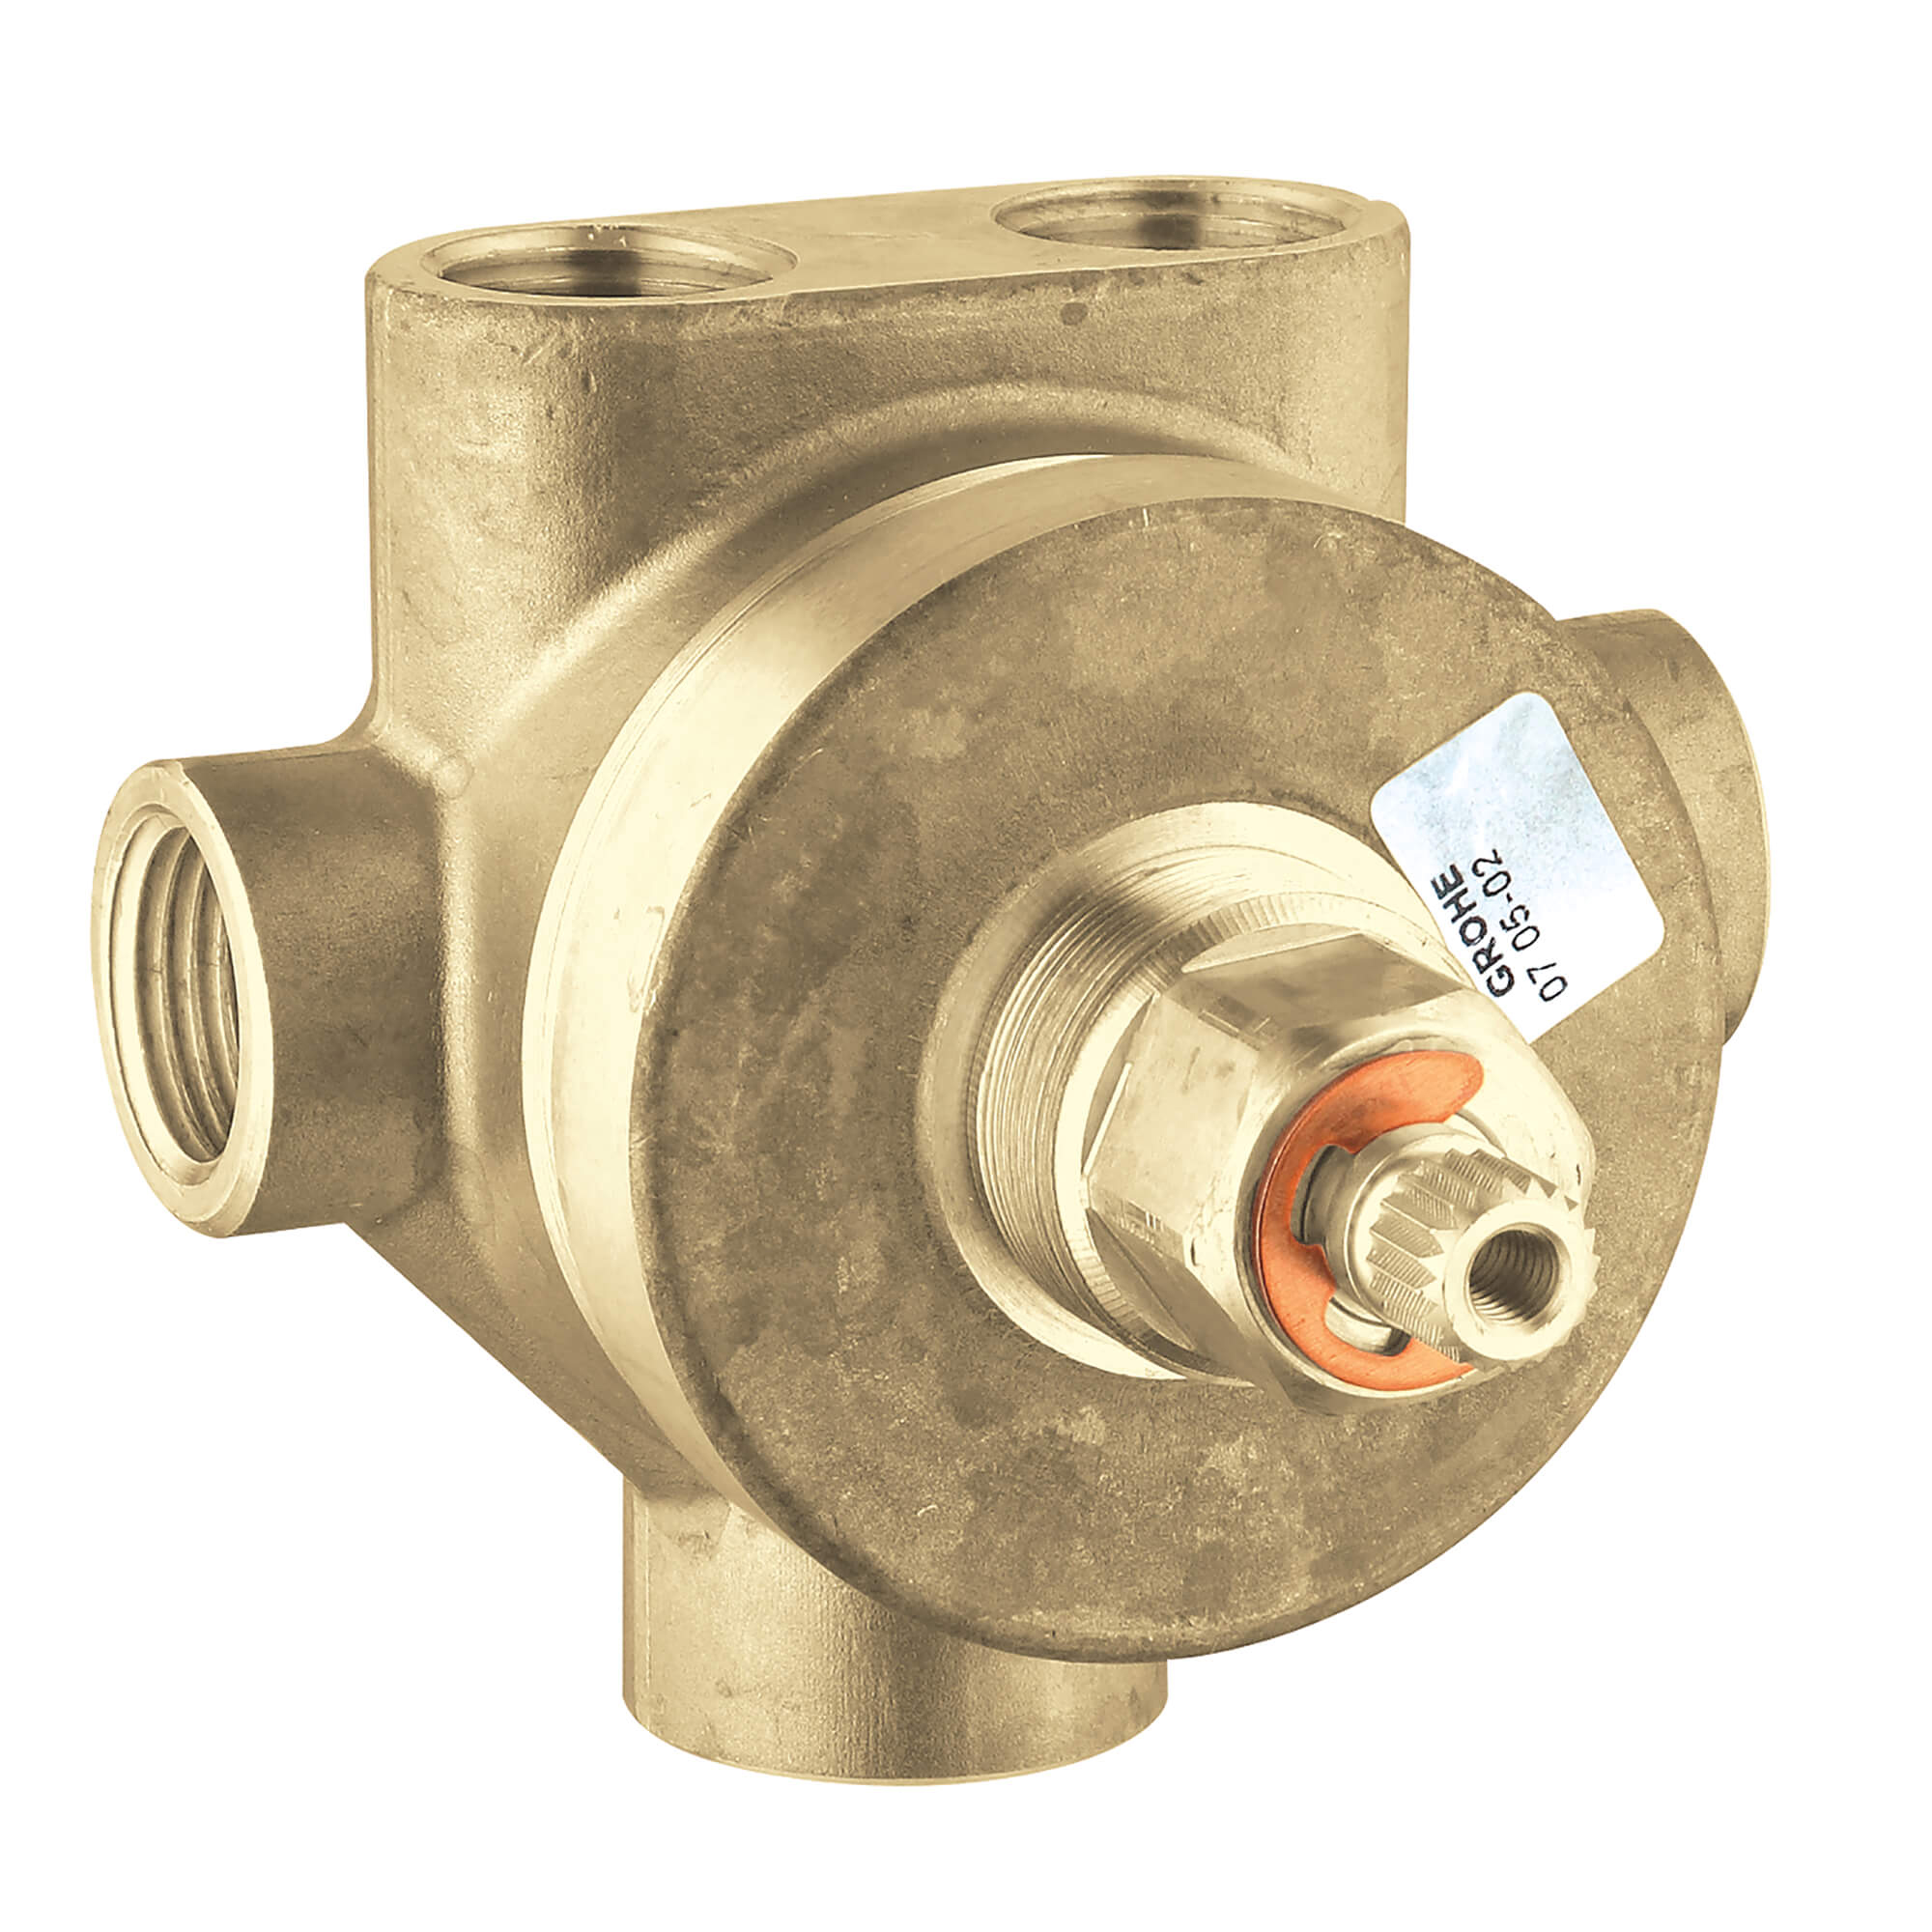 3-Way Diverter Rough-In Valve Shared Functions 1/2" NPT 2 Inlets/3 Outlets